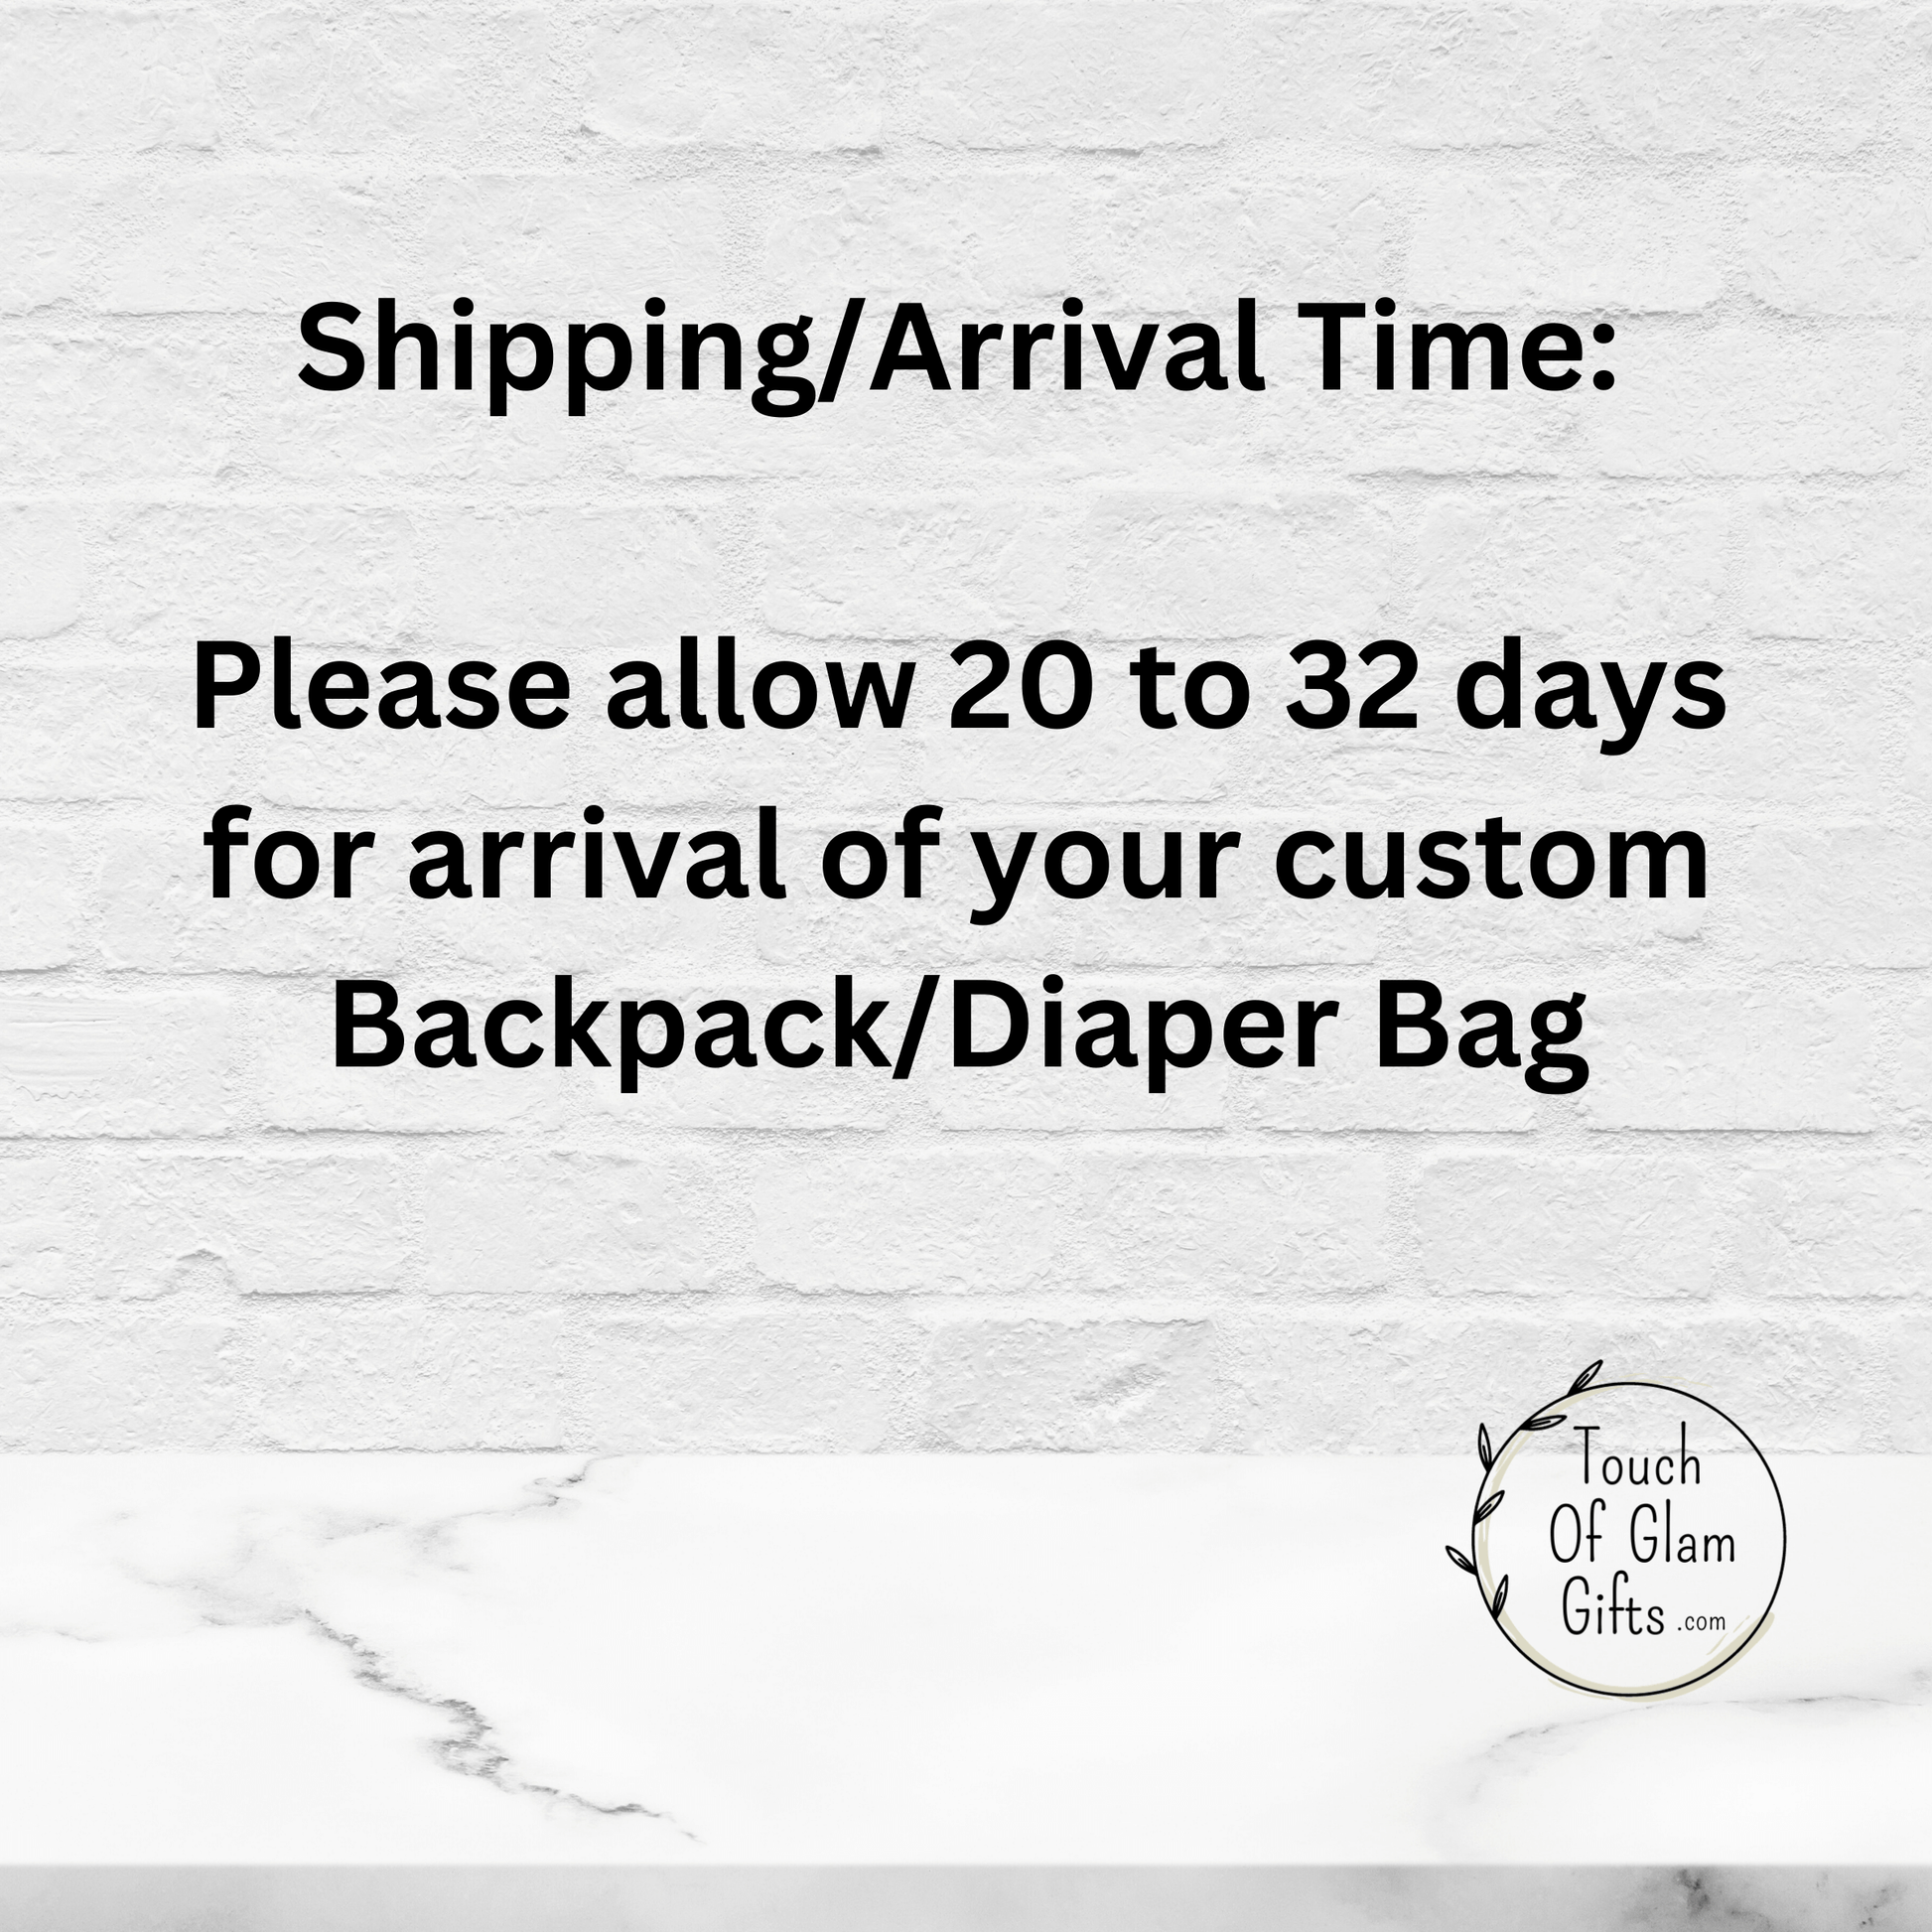 Shipping arrival time is twenty to thirty two days for the arrival of your custom cowhide backpack diaper bag.